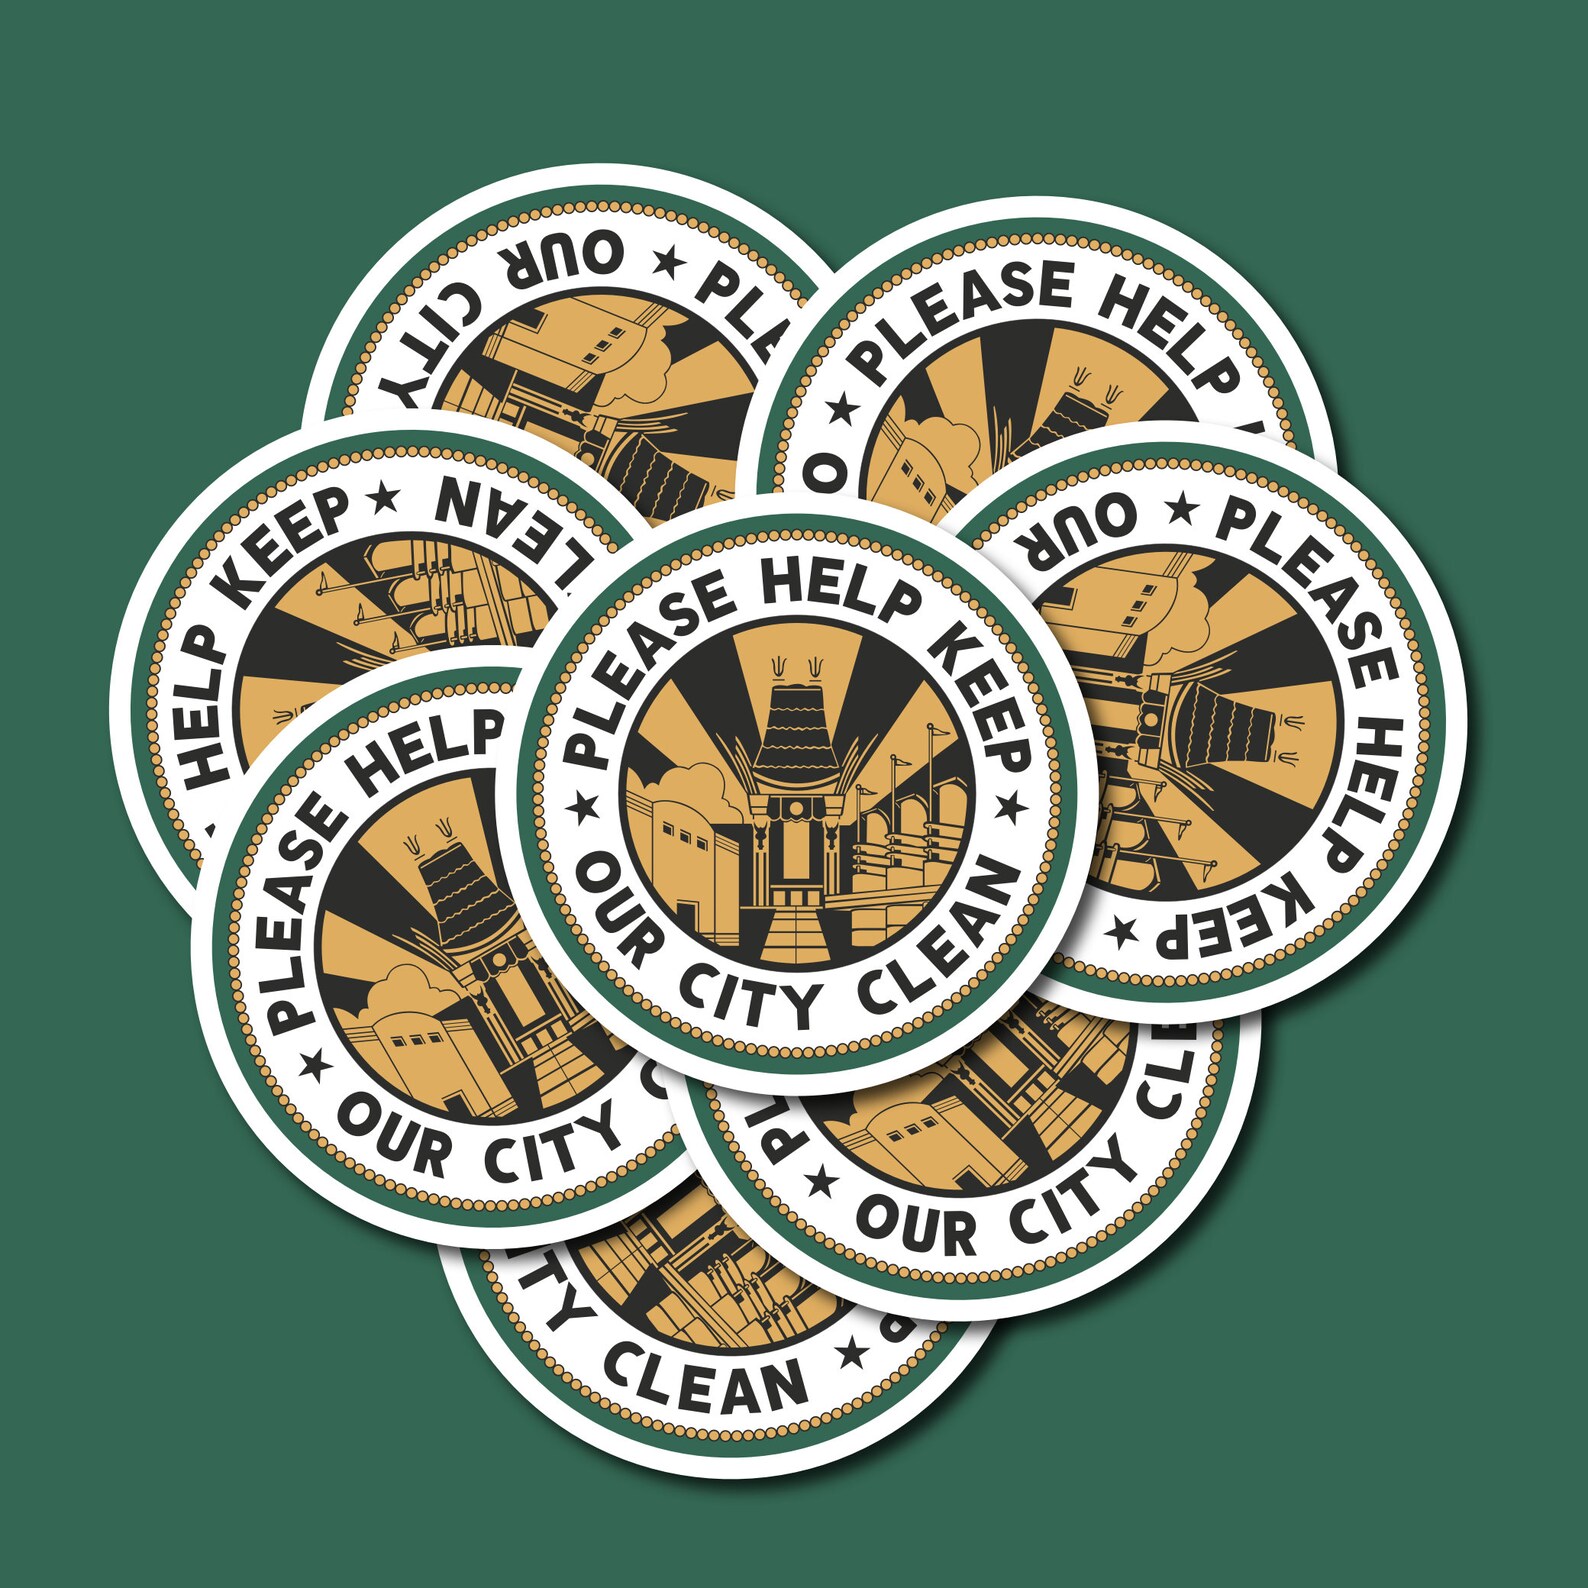 Please Help Keep Our City Clean Vinyl Sticker Inspired by - Etsy